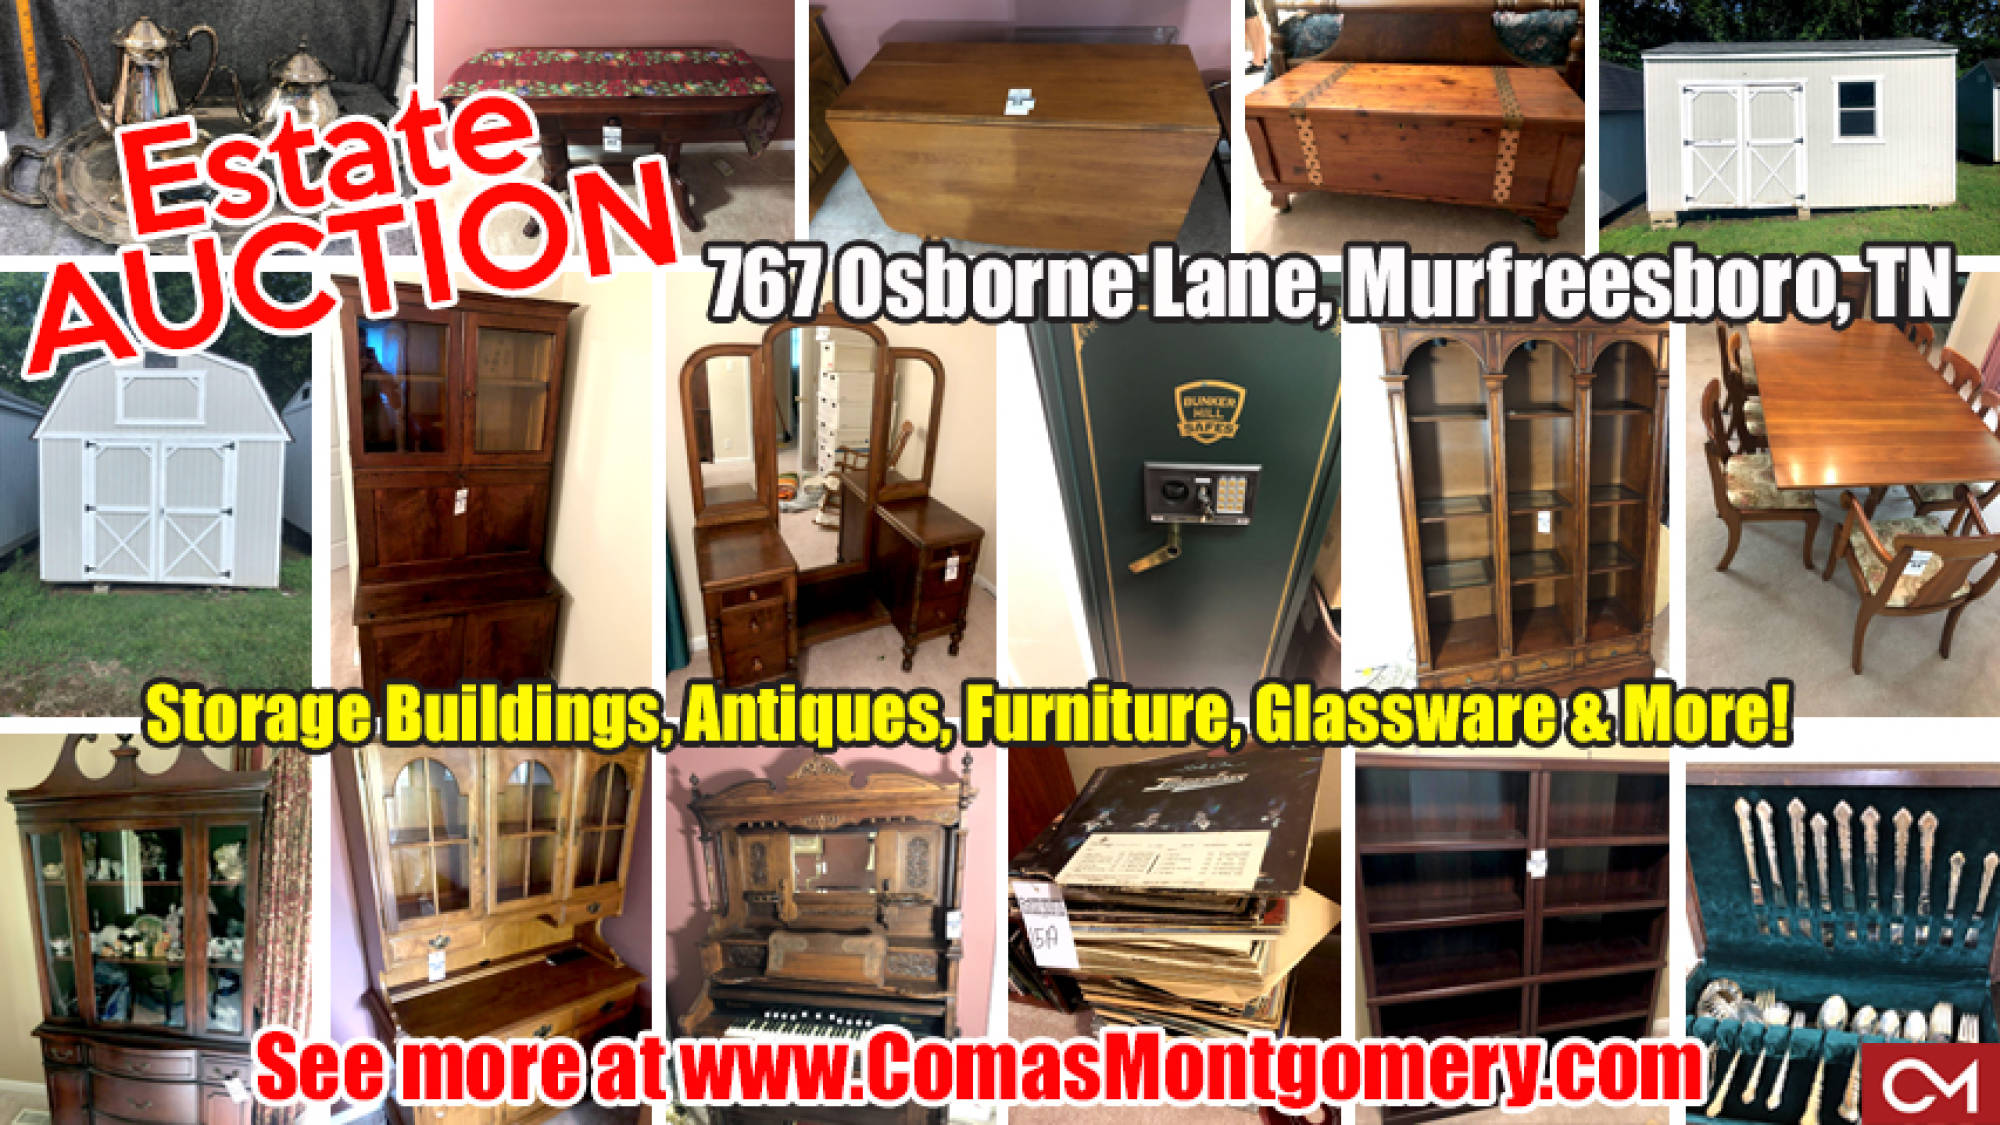 Furniture, Antiques, Storage Building, Glassware, Estate, Auction, For Sale, Murfreesboro, Tennessee, Comas, Montgomery, Silverware, Records, Tools, China Cabinet, Bedroom Suite, Appliances